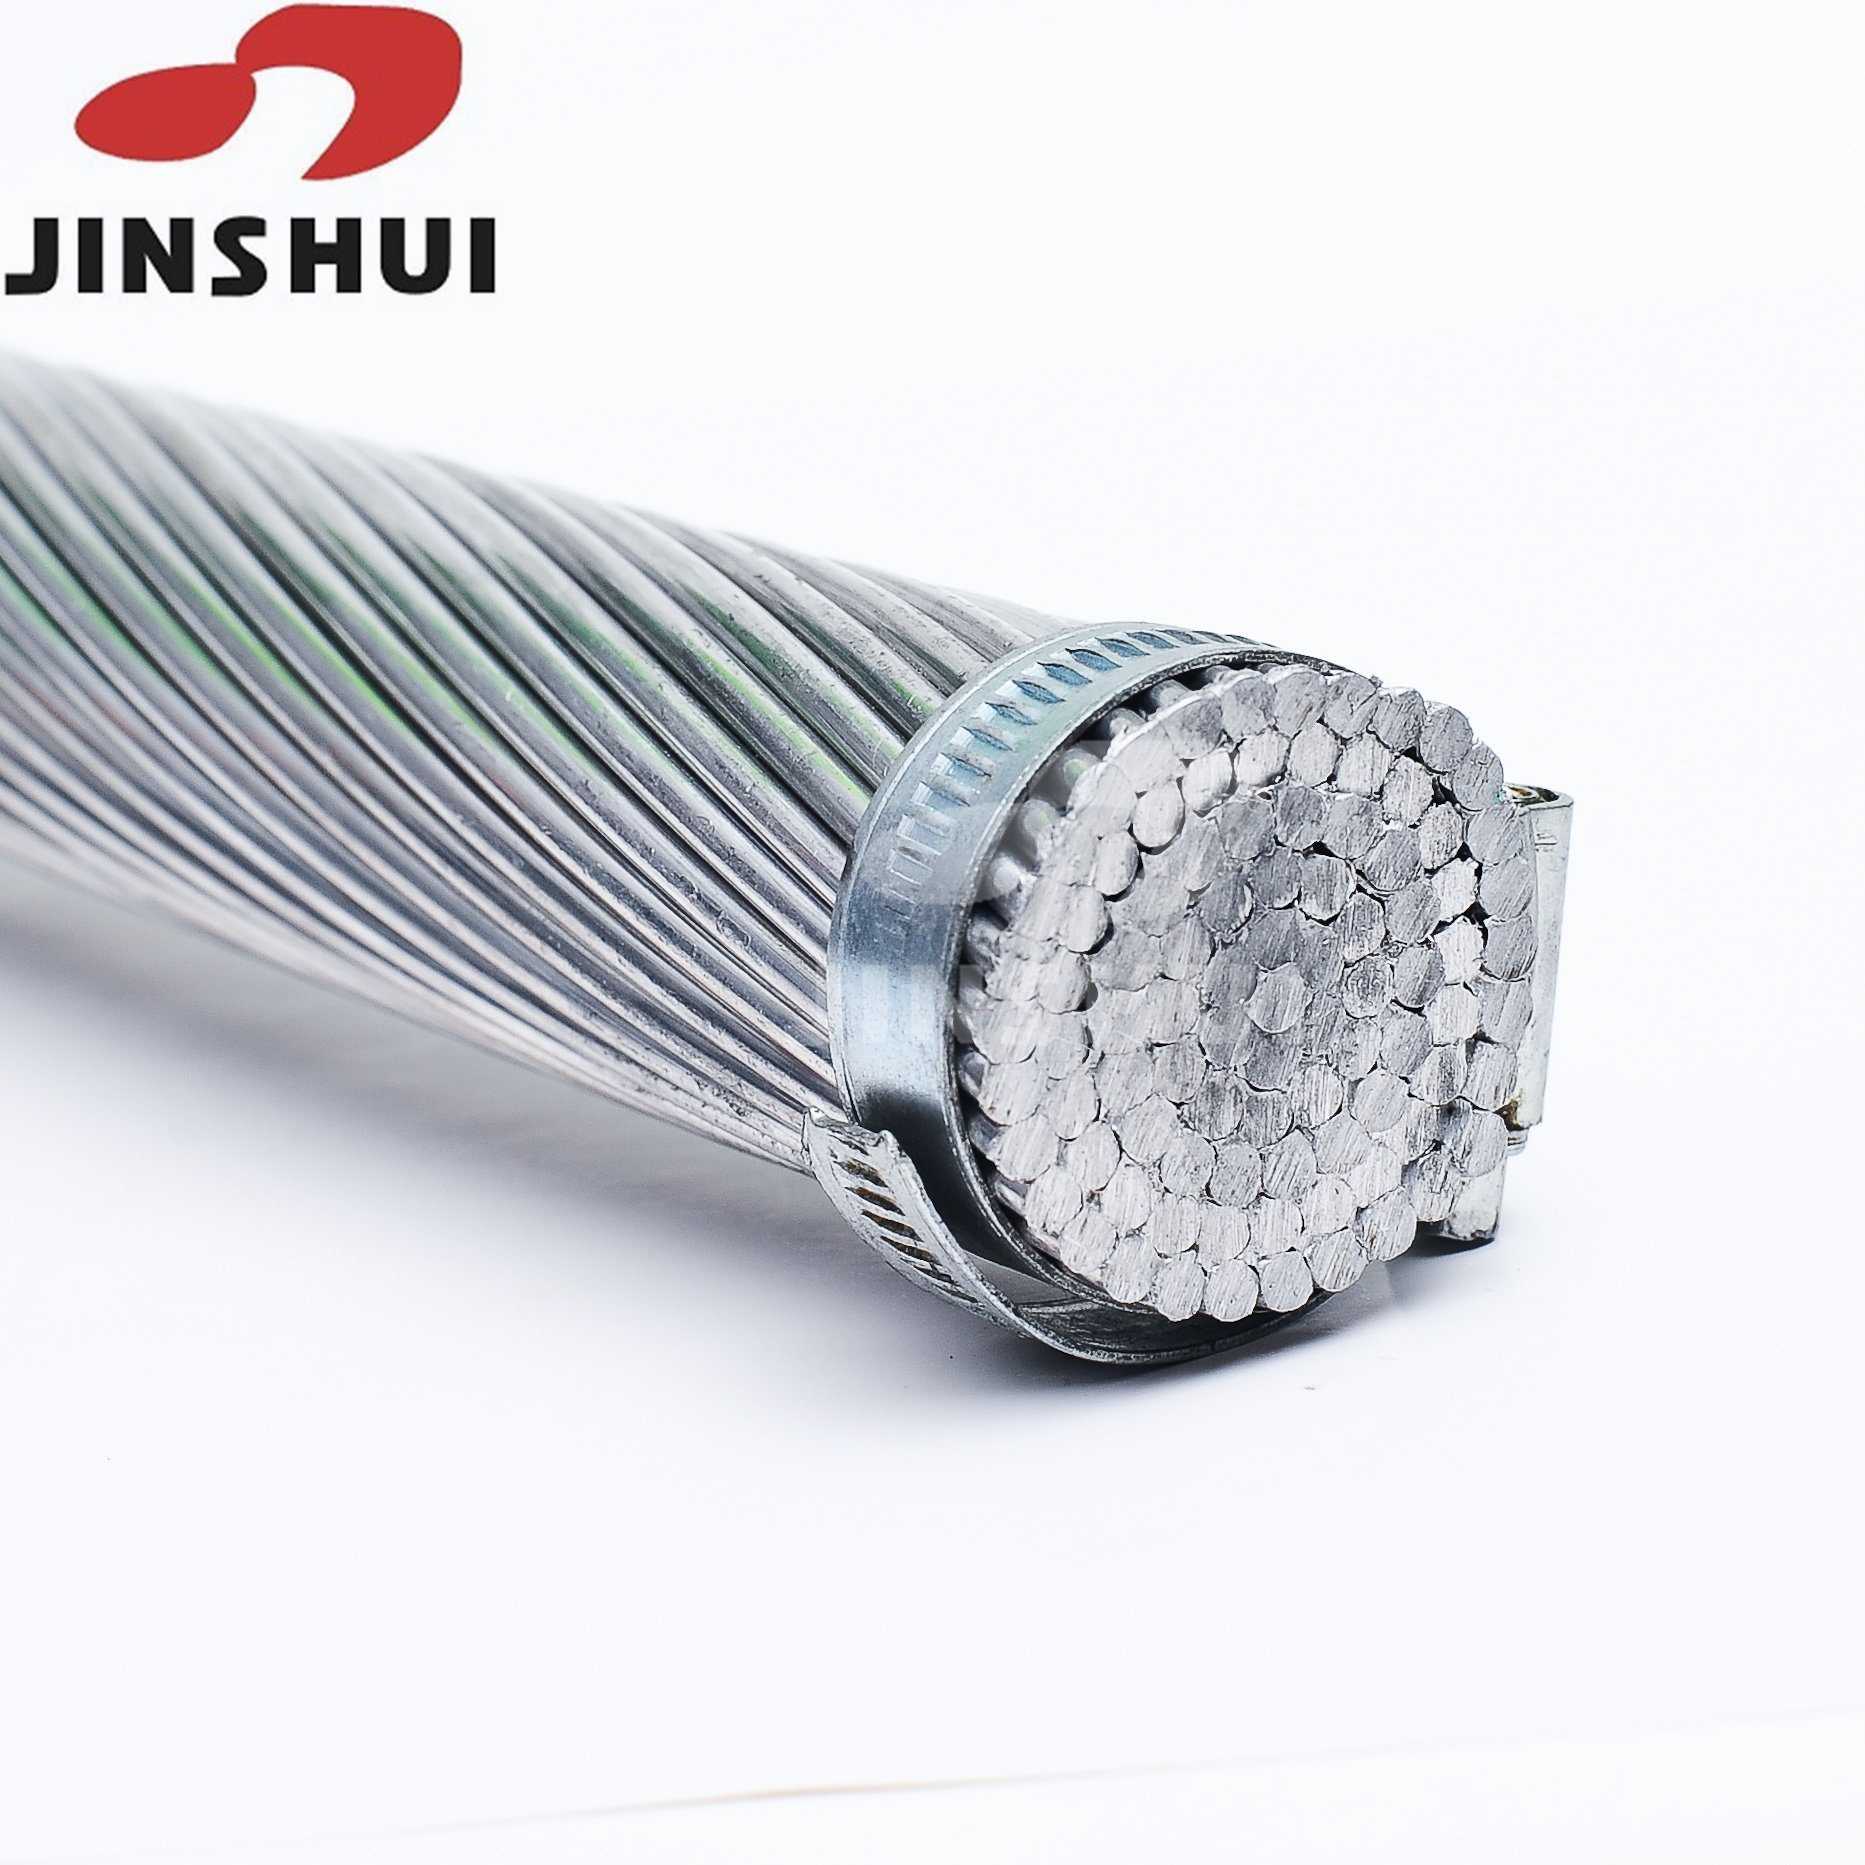 Super Low Price Aluminium Conductor Steel Reinforced Conductor